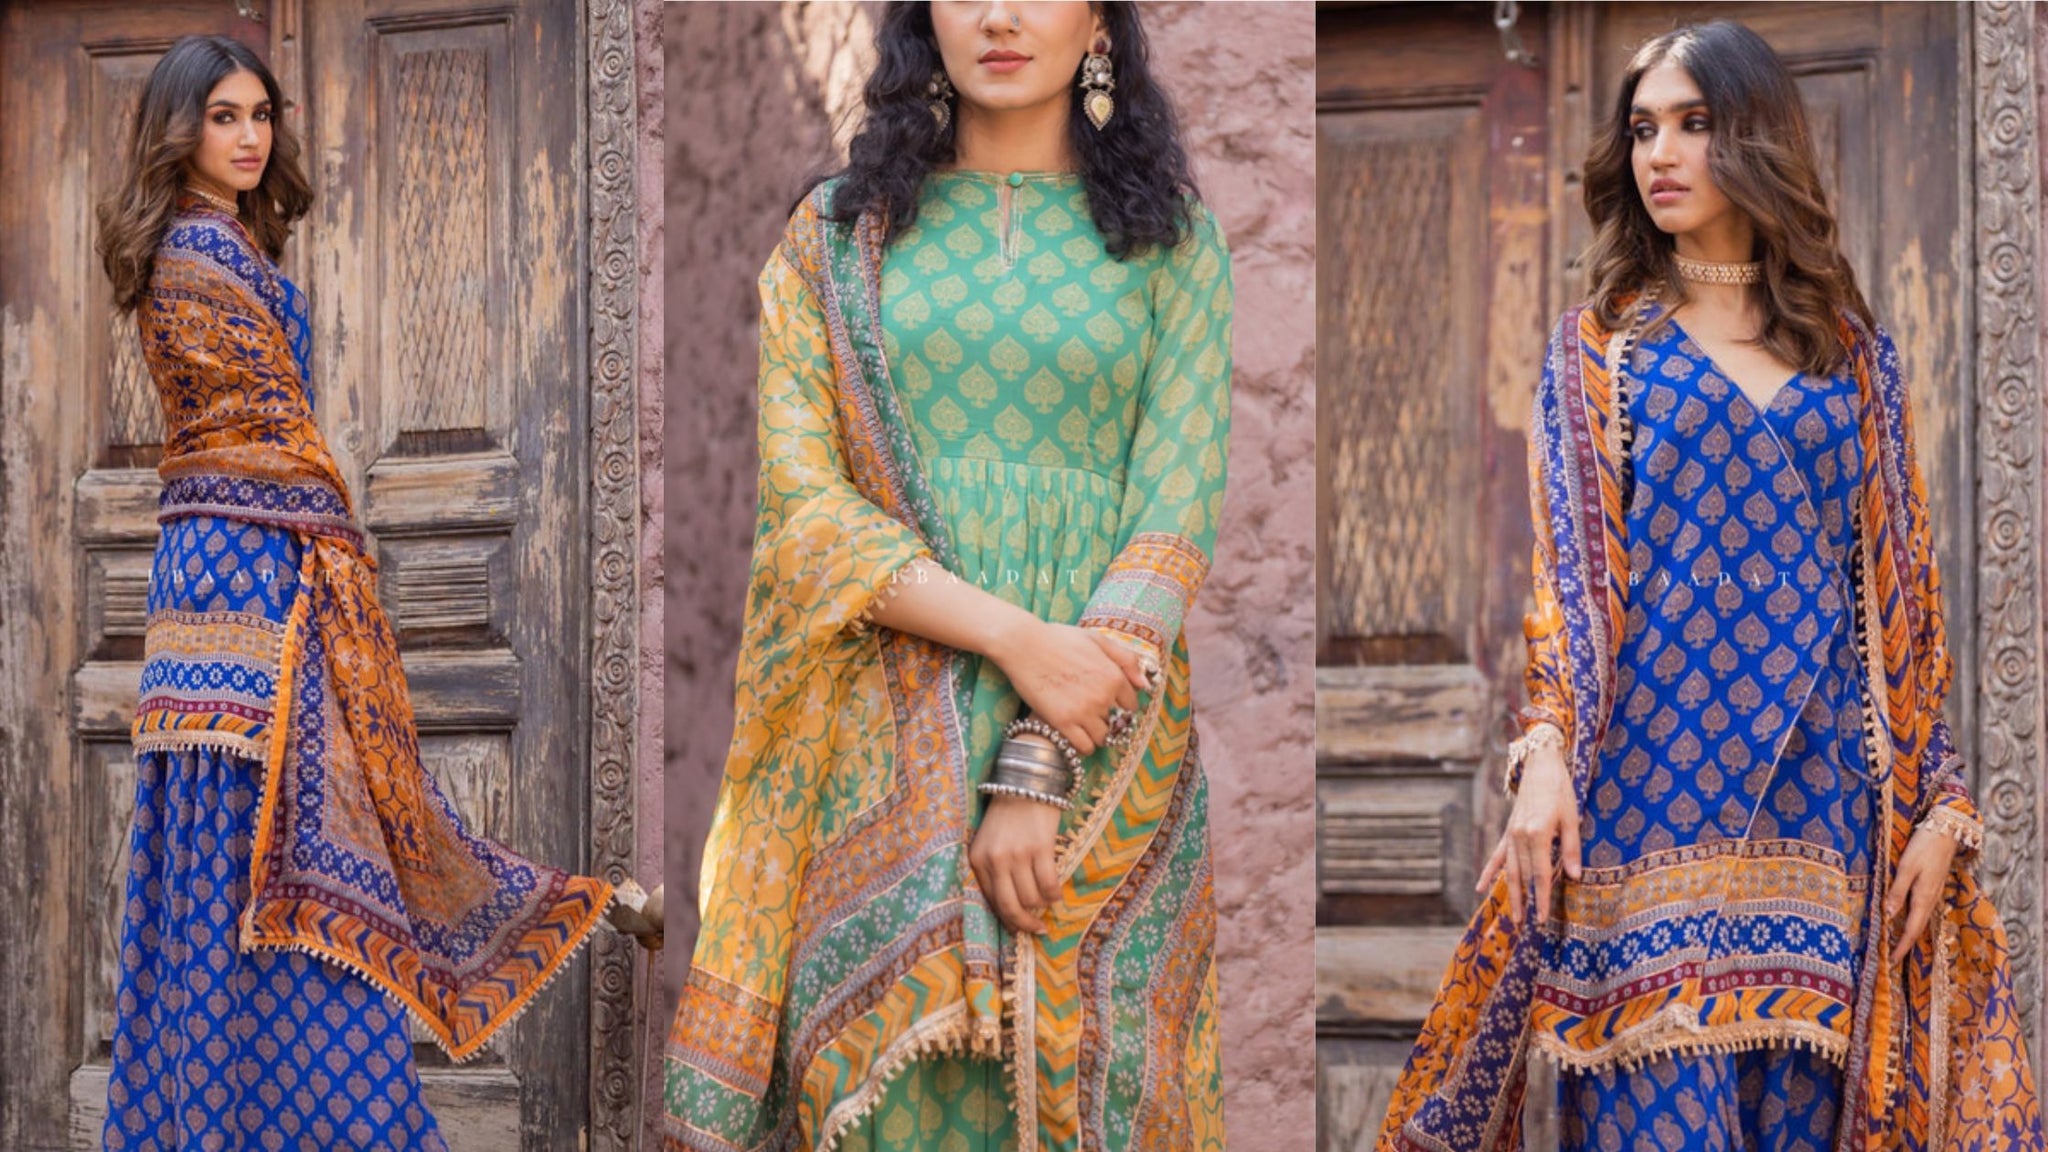 7 Magnificent Ethnic Dress To Make This Diwali Look Stylish